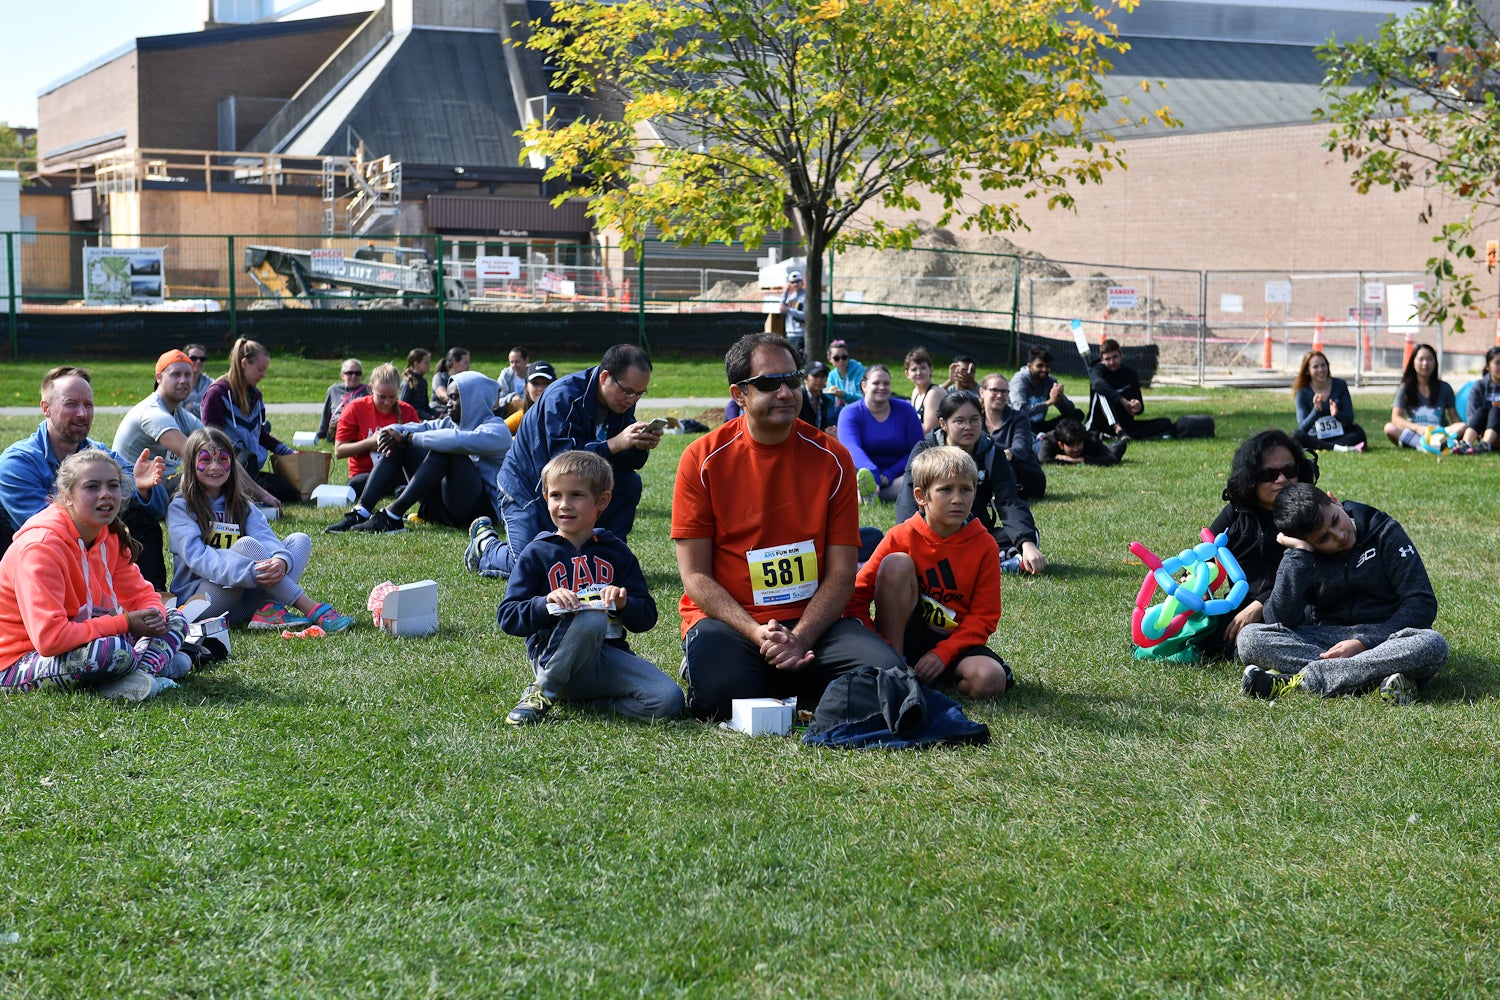 Fun Run participants sitting on the grass smiling